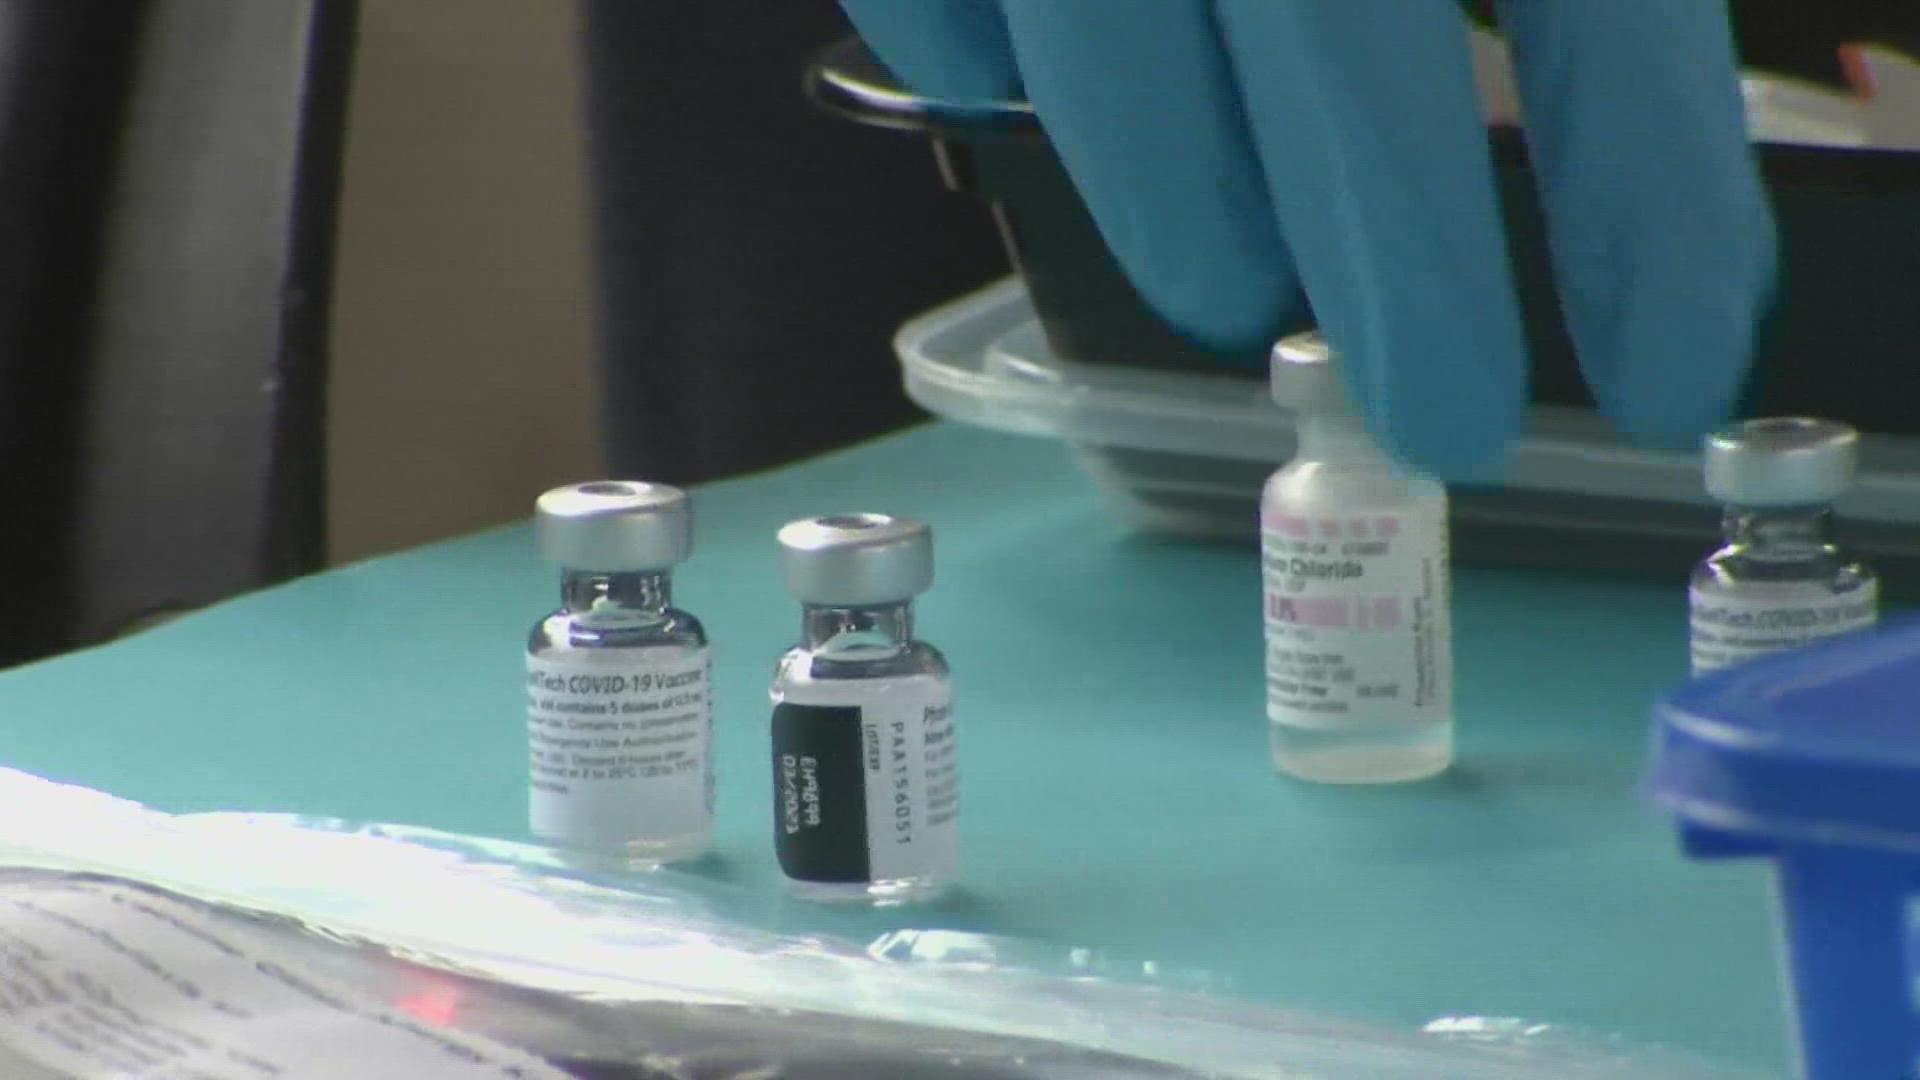 An outdoor vaccination clinic will be held Wednesday afternoon at Kennedy Park in Lewiston. The goal is to get students vaccinated and boosted before school starts.